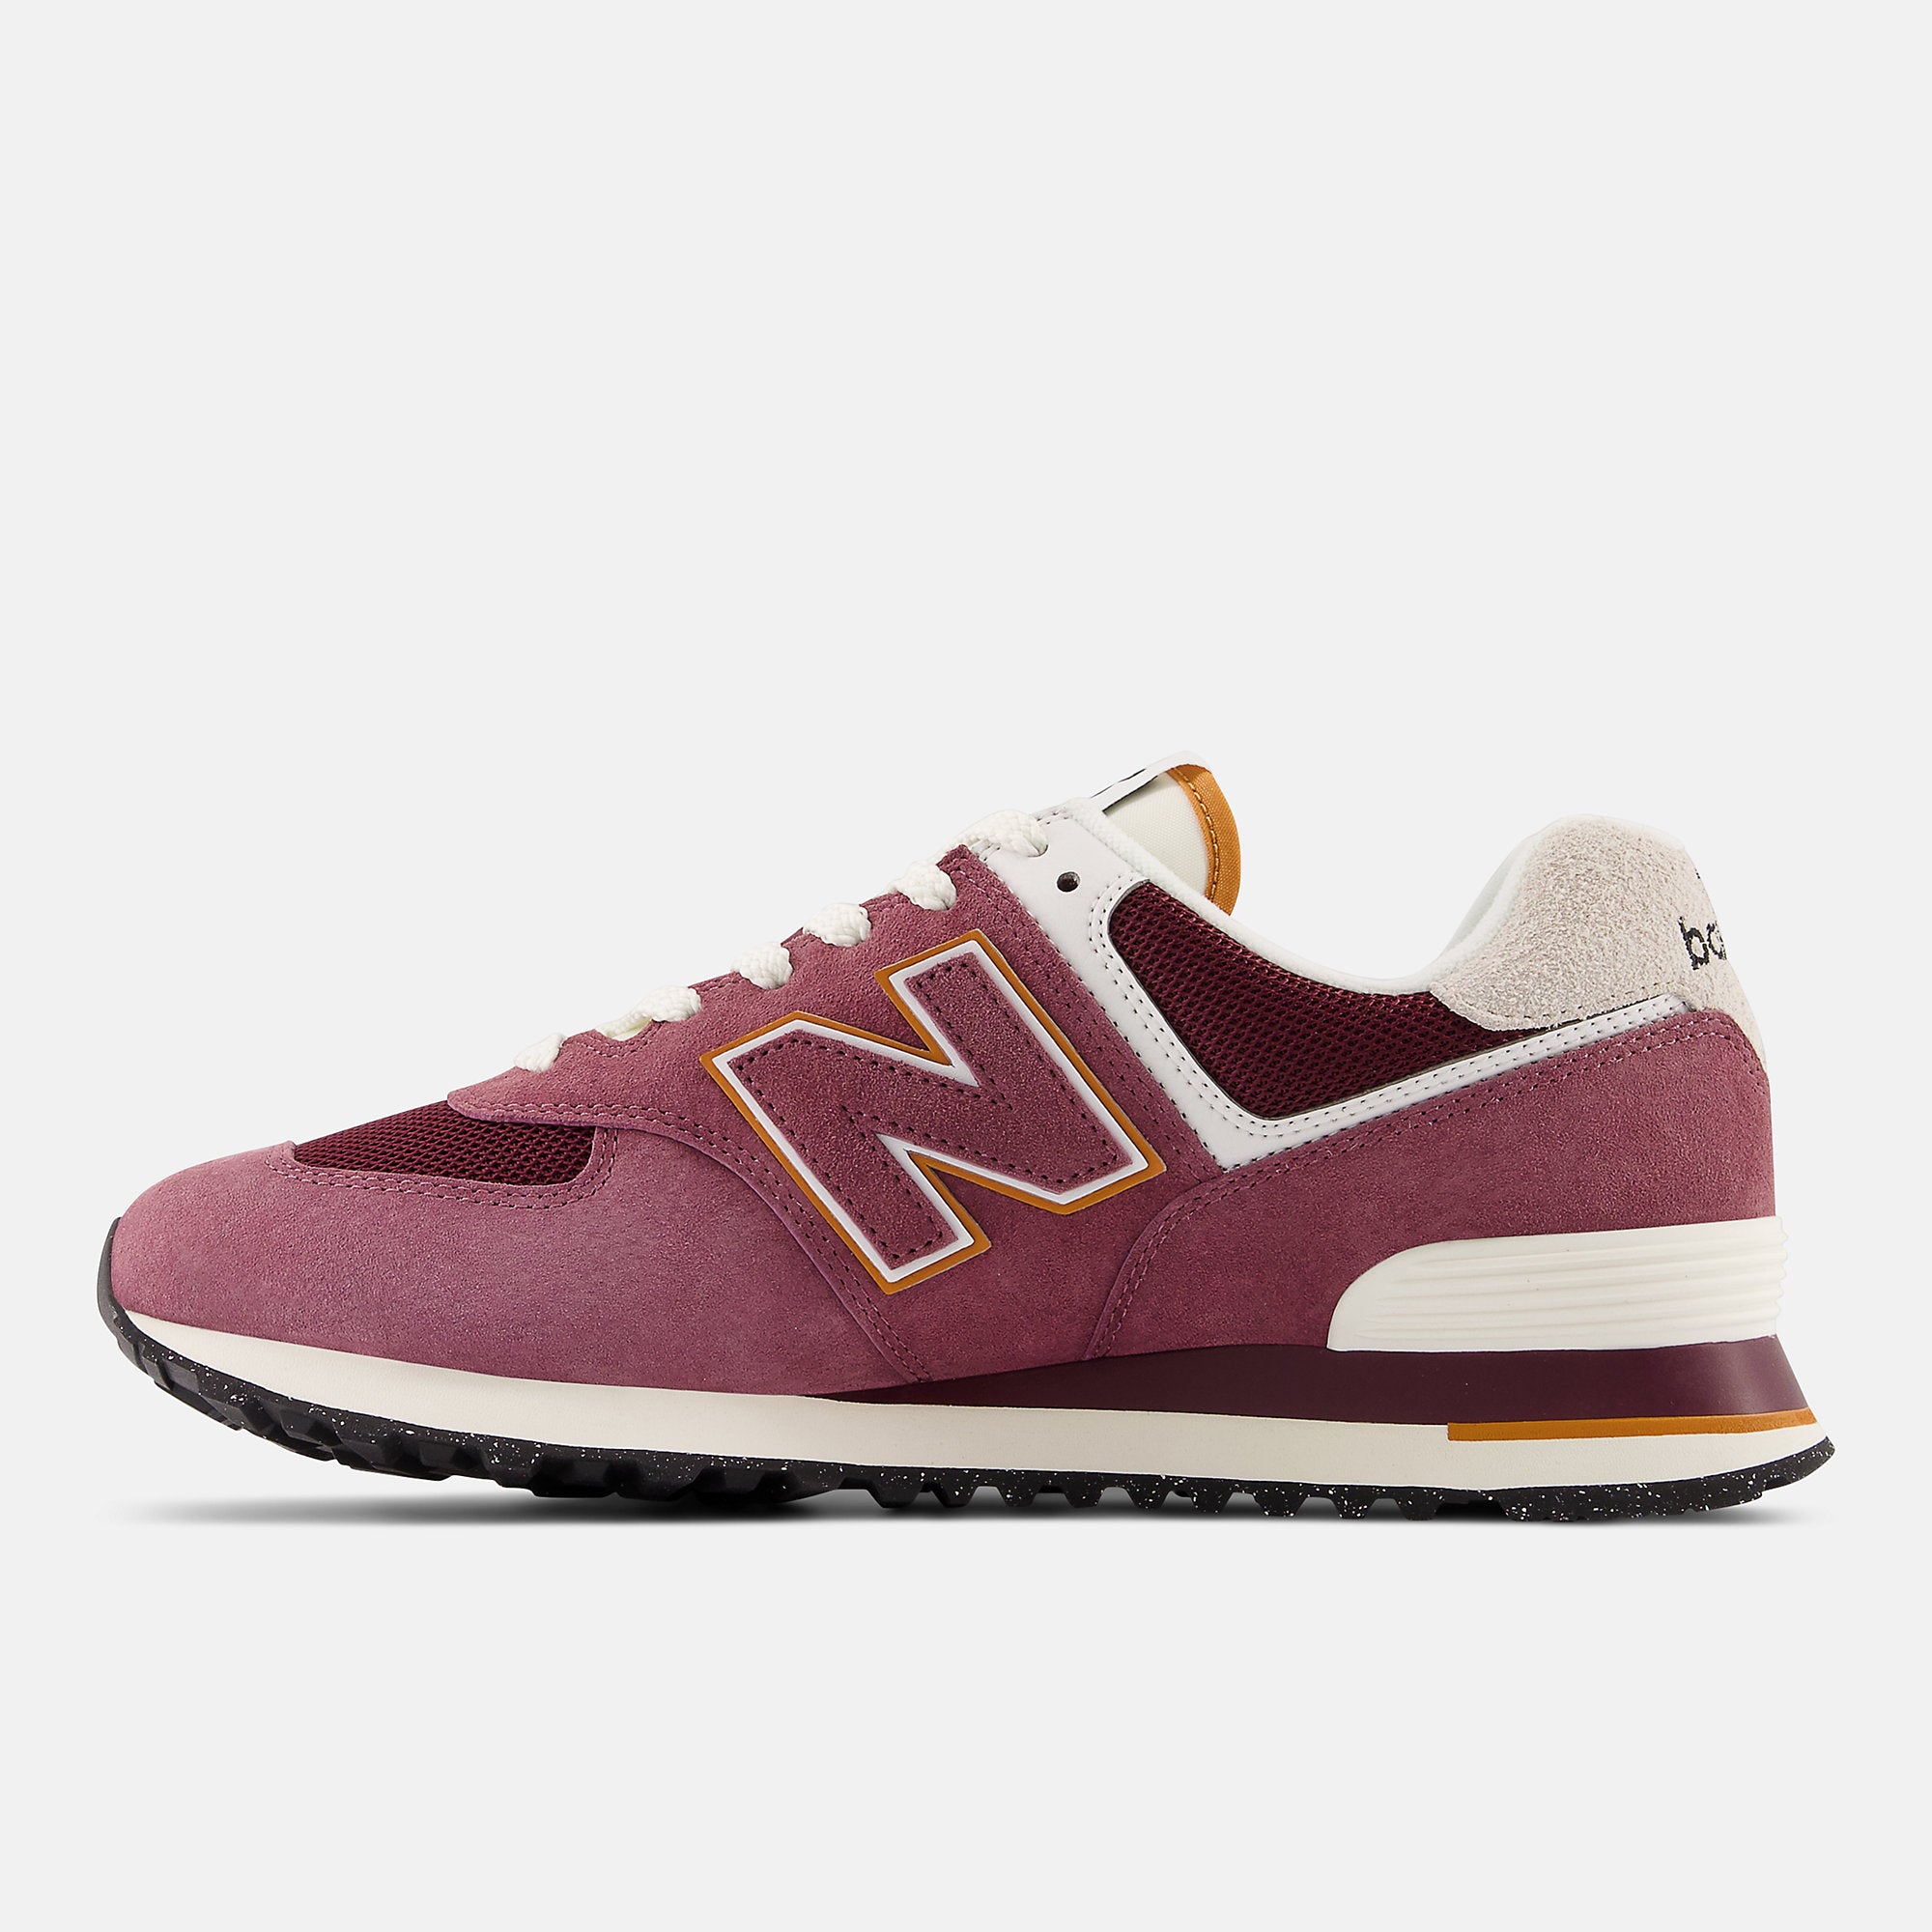 New Balance Mens 574 Fashion Trainers - Burgundy - The Foot Factory